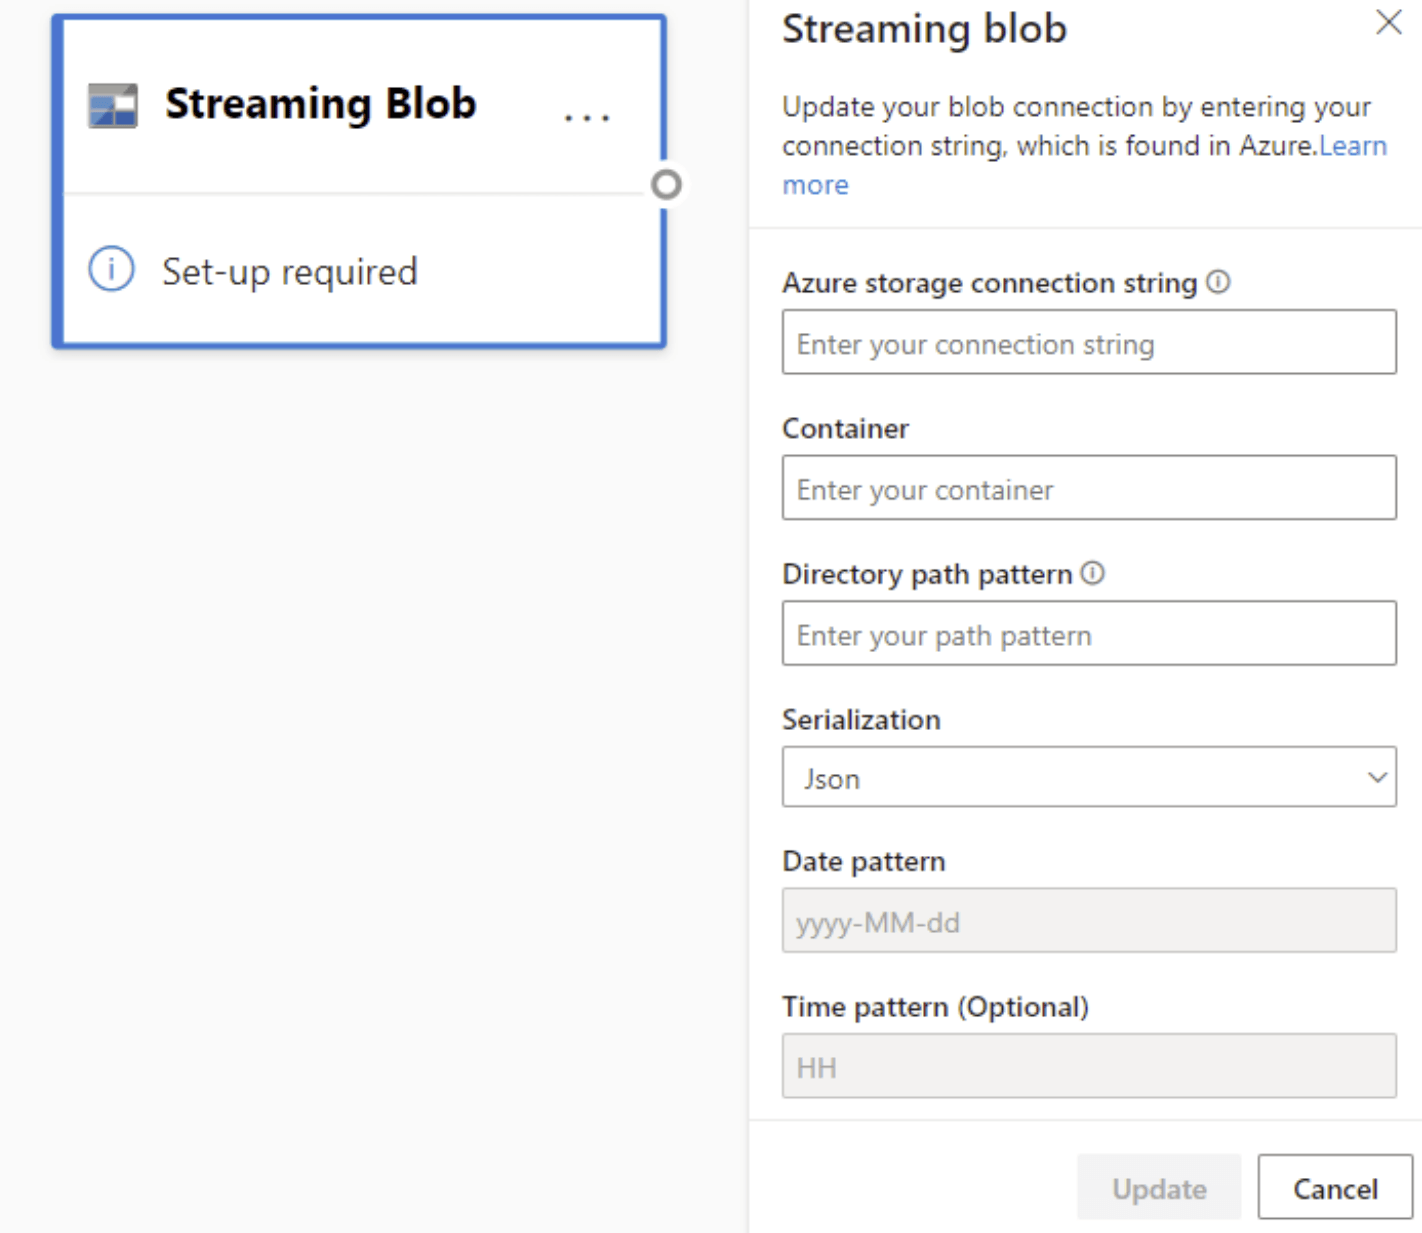  Screenshot that shows the Streaming blob card and configuration pane in diagram view